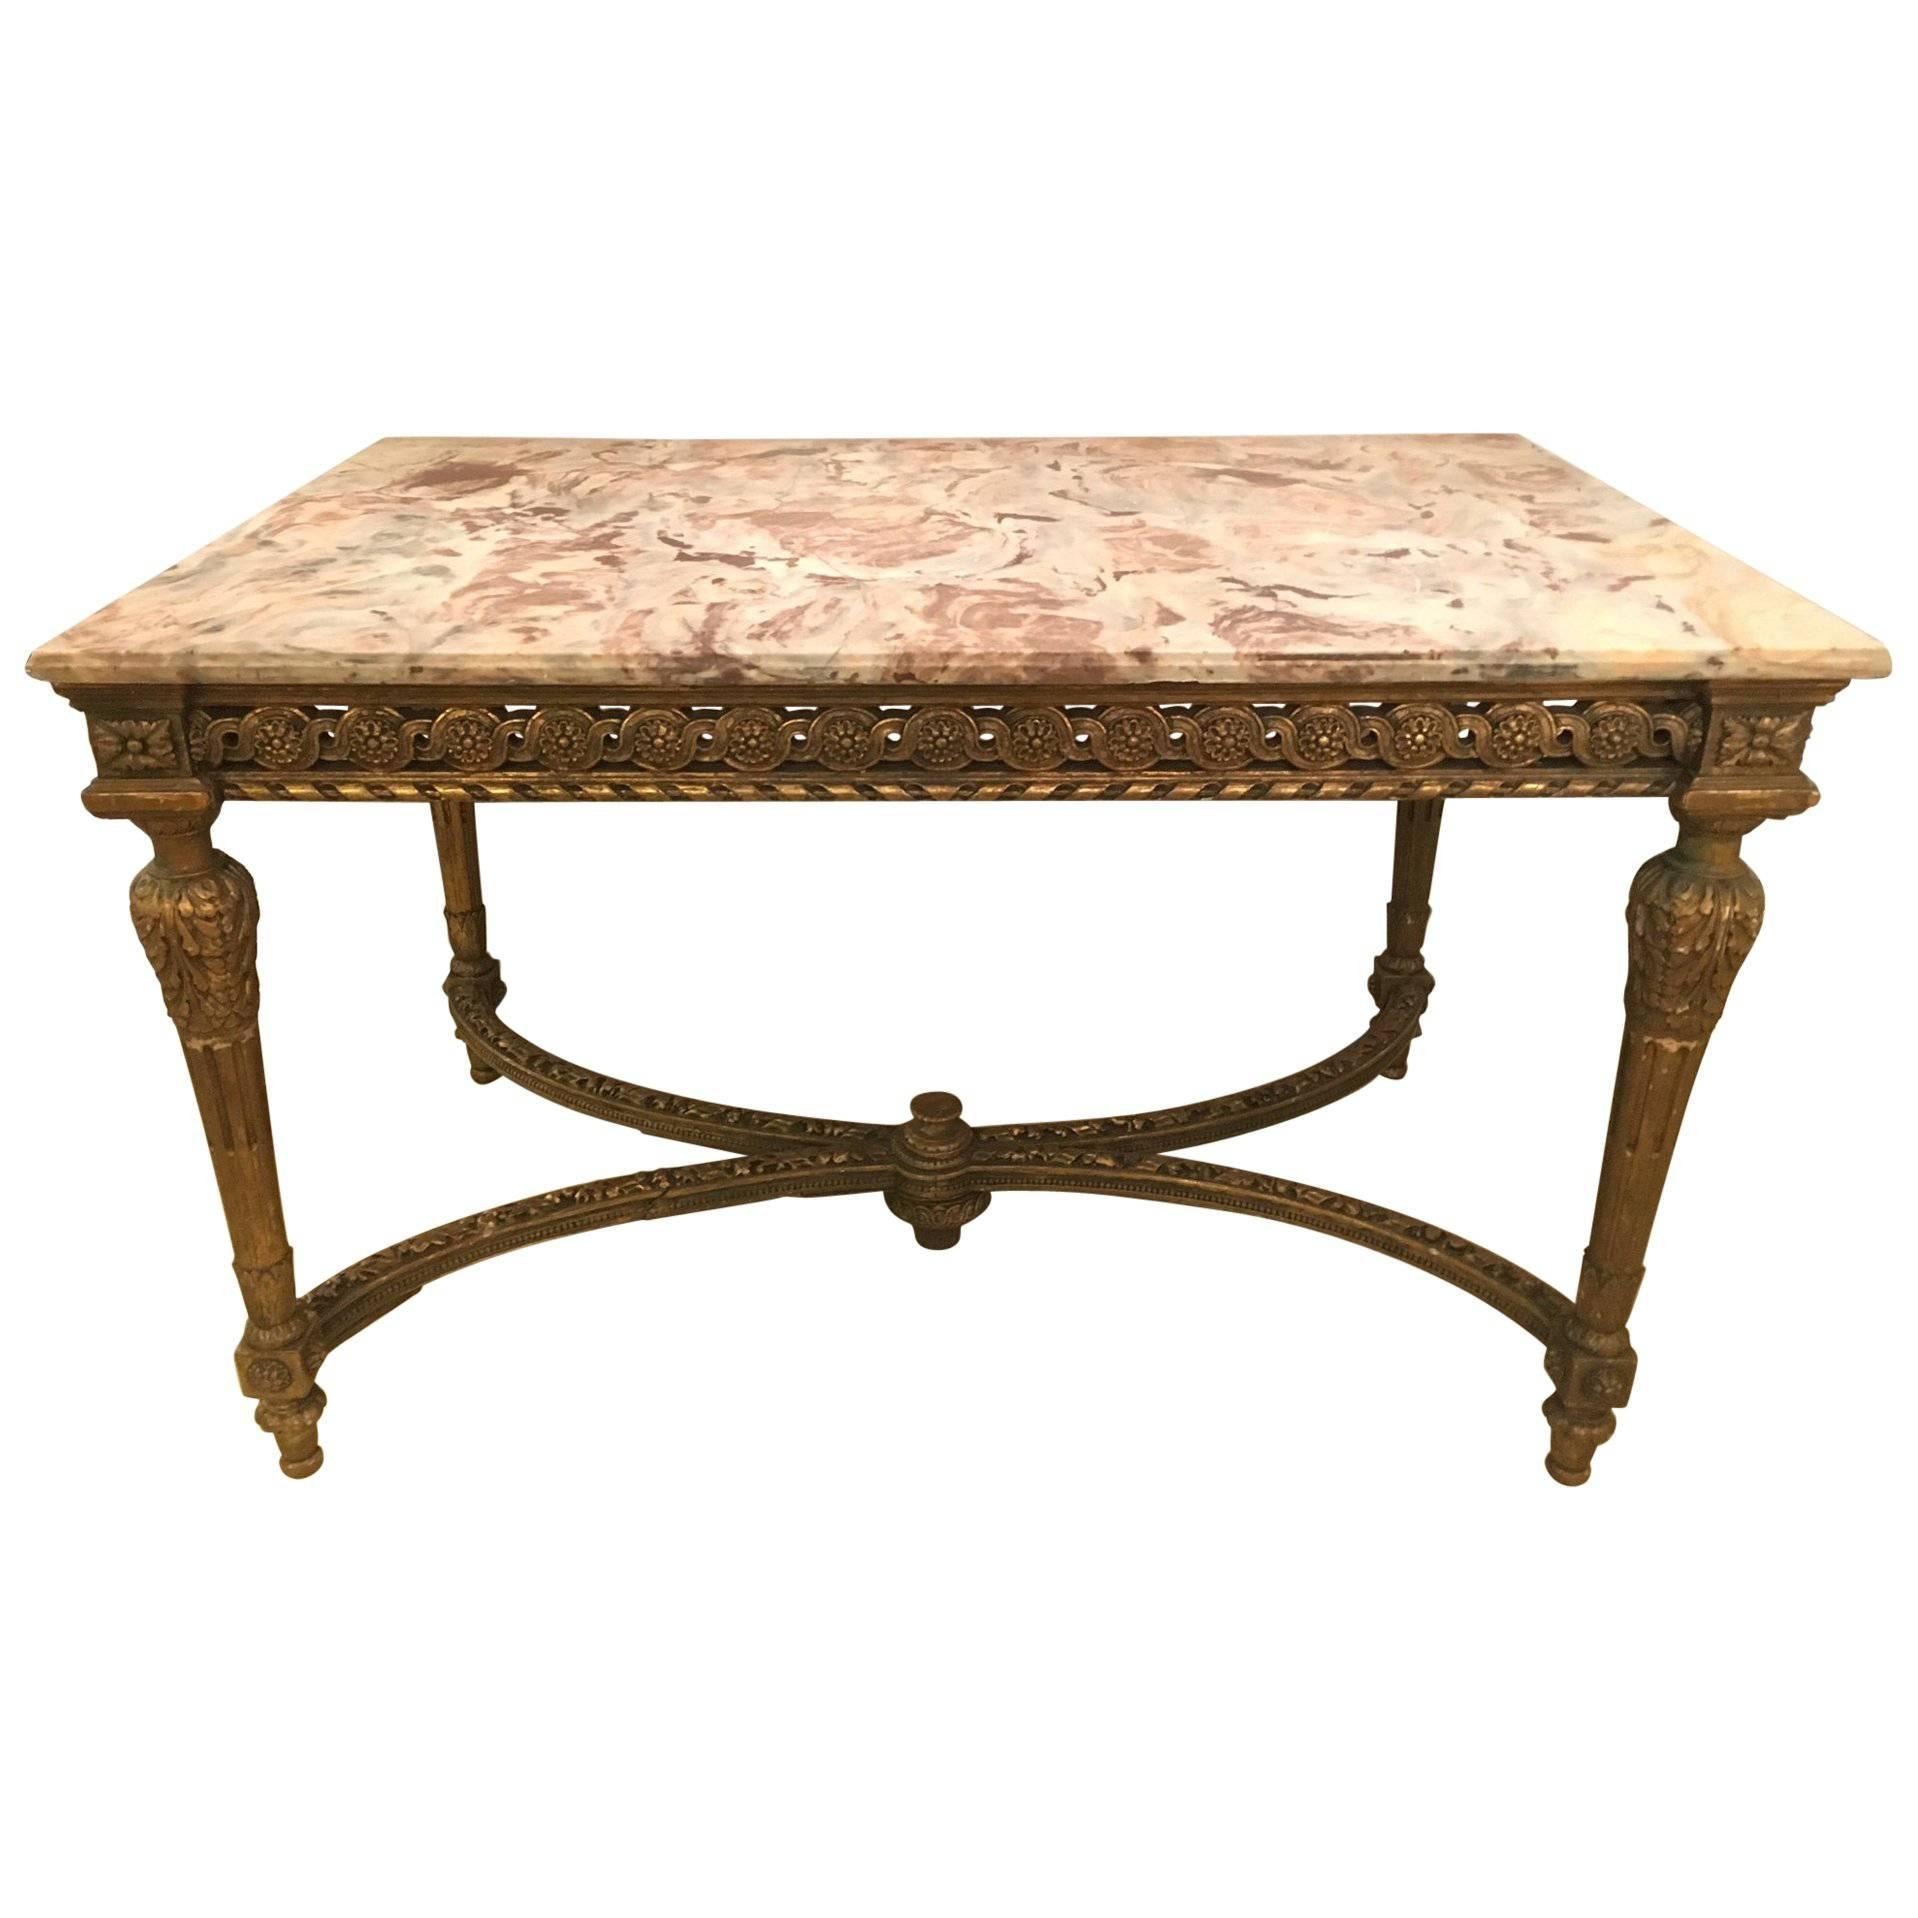 French Center Table or Console Louis XVI Jansen Style Stunning Marble Top Gilt Base For Sale